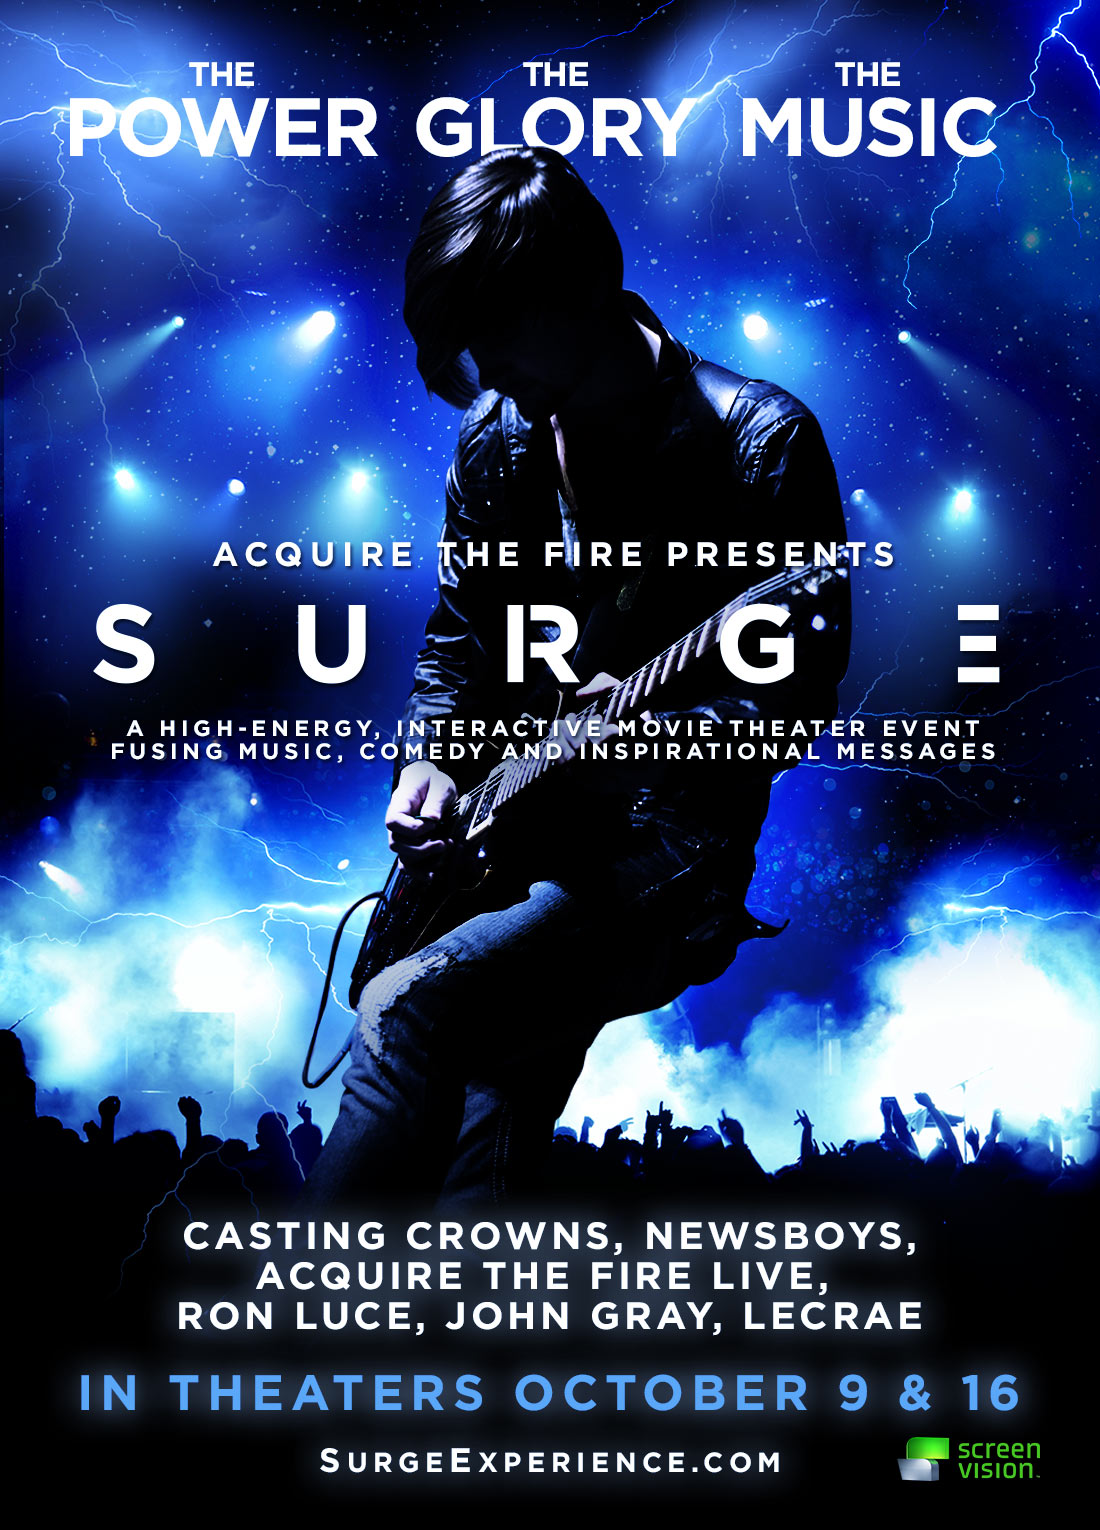 SURGE Hits Theaters Oct. 9 & 16